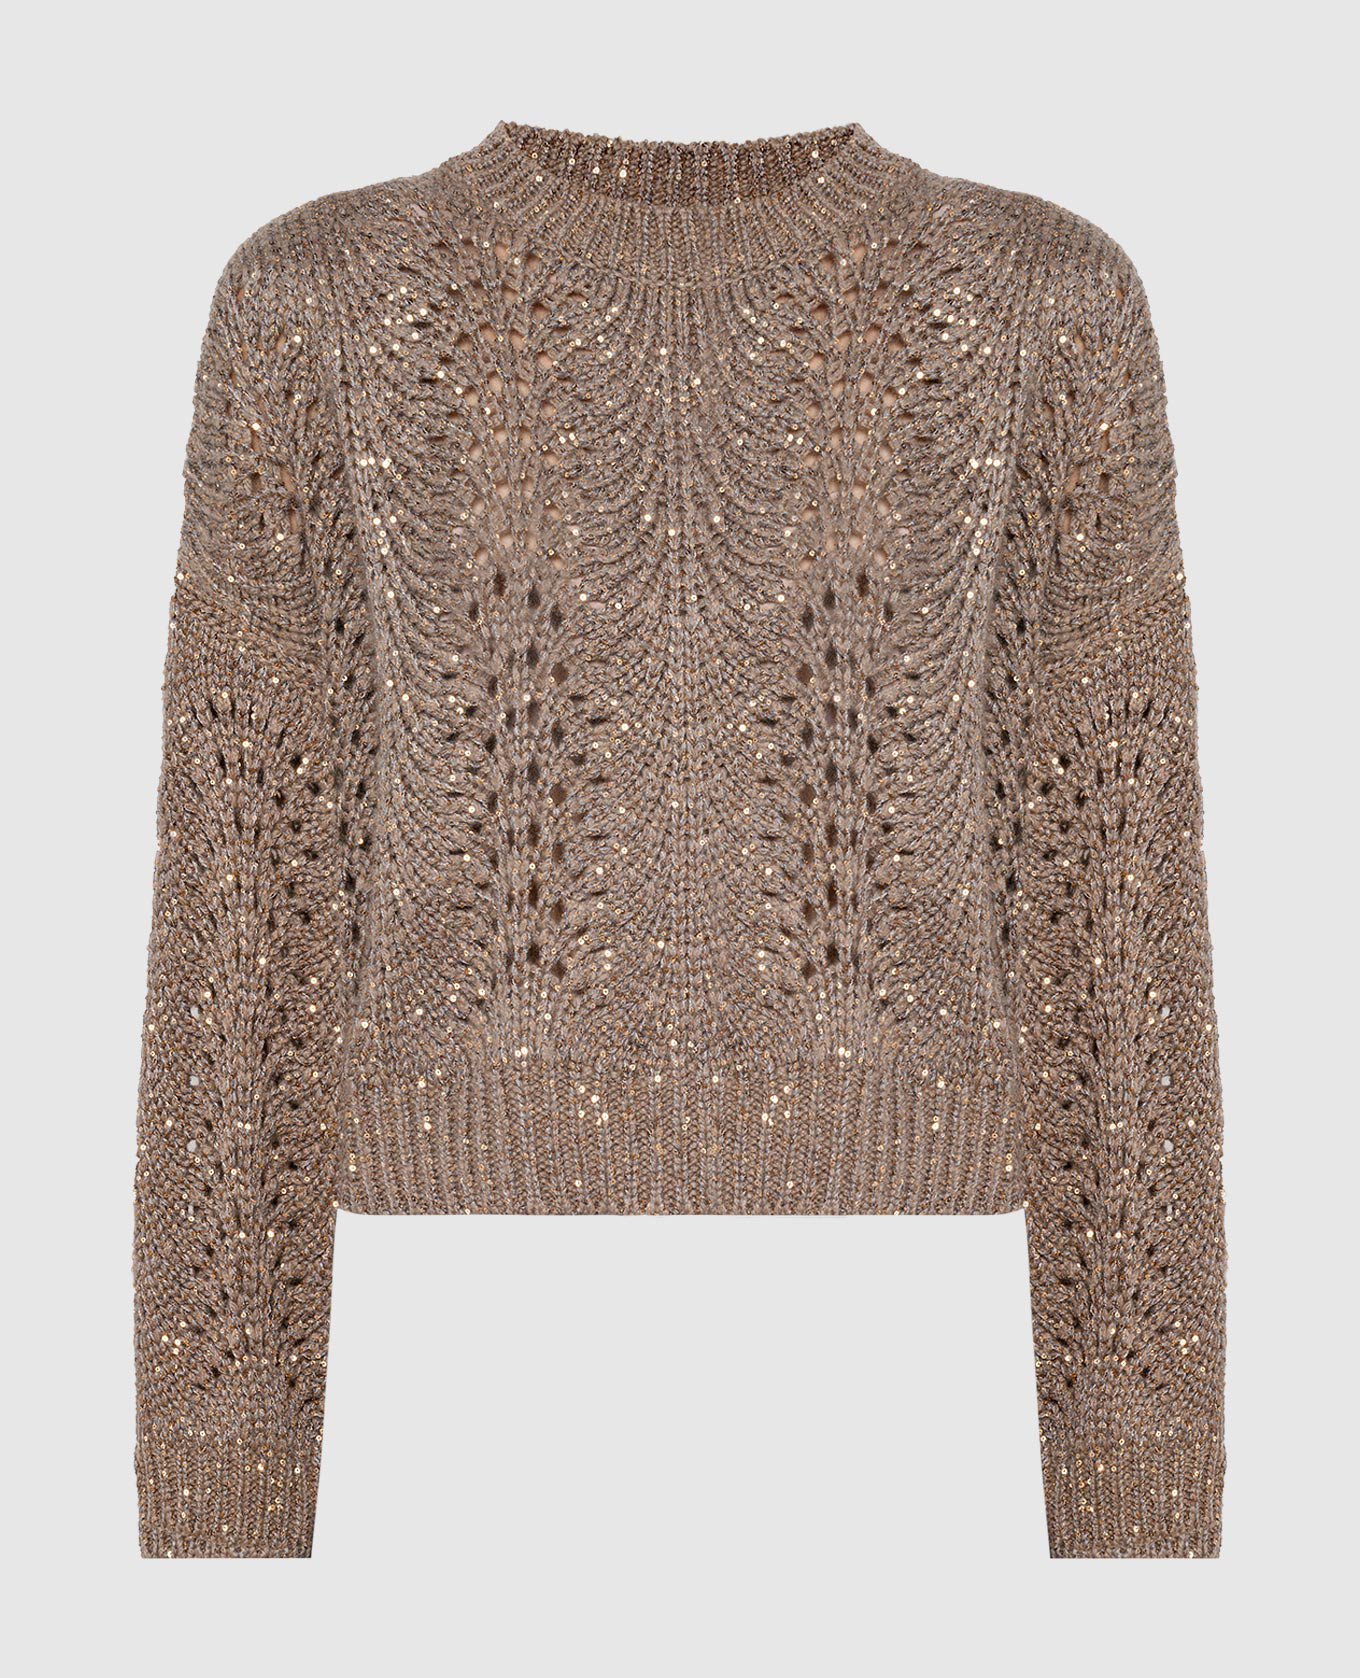 Brown openwork knit sweater with sequins